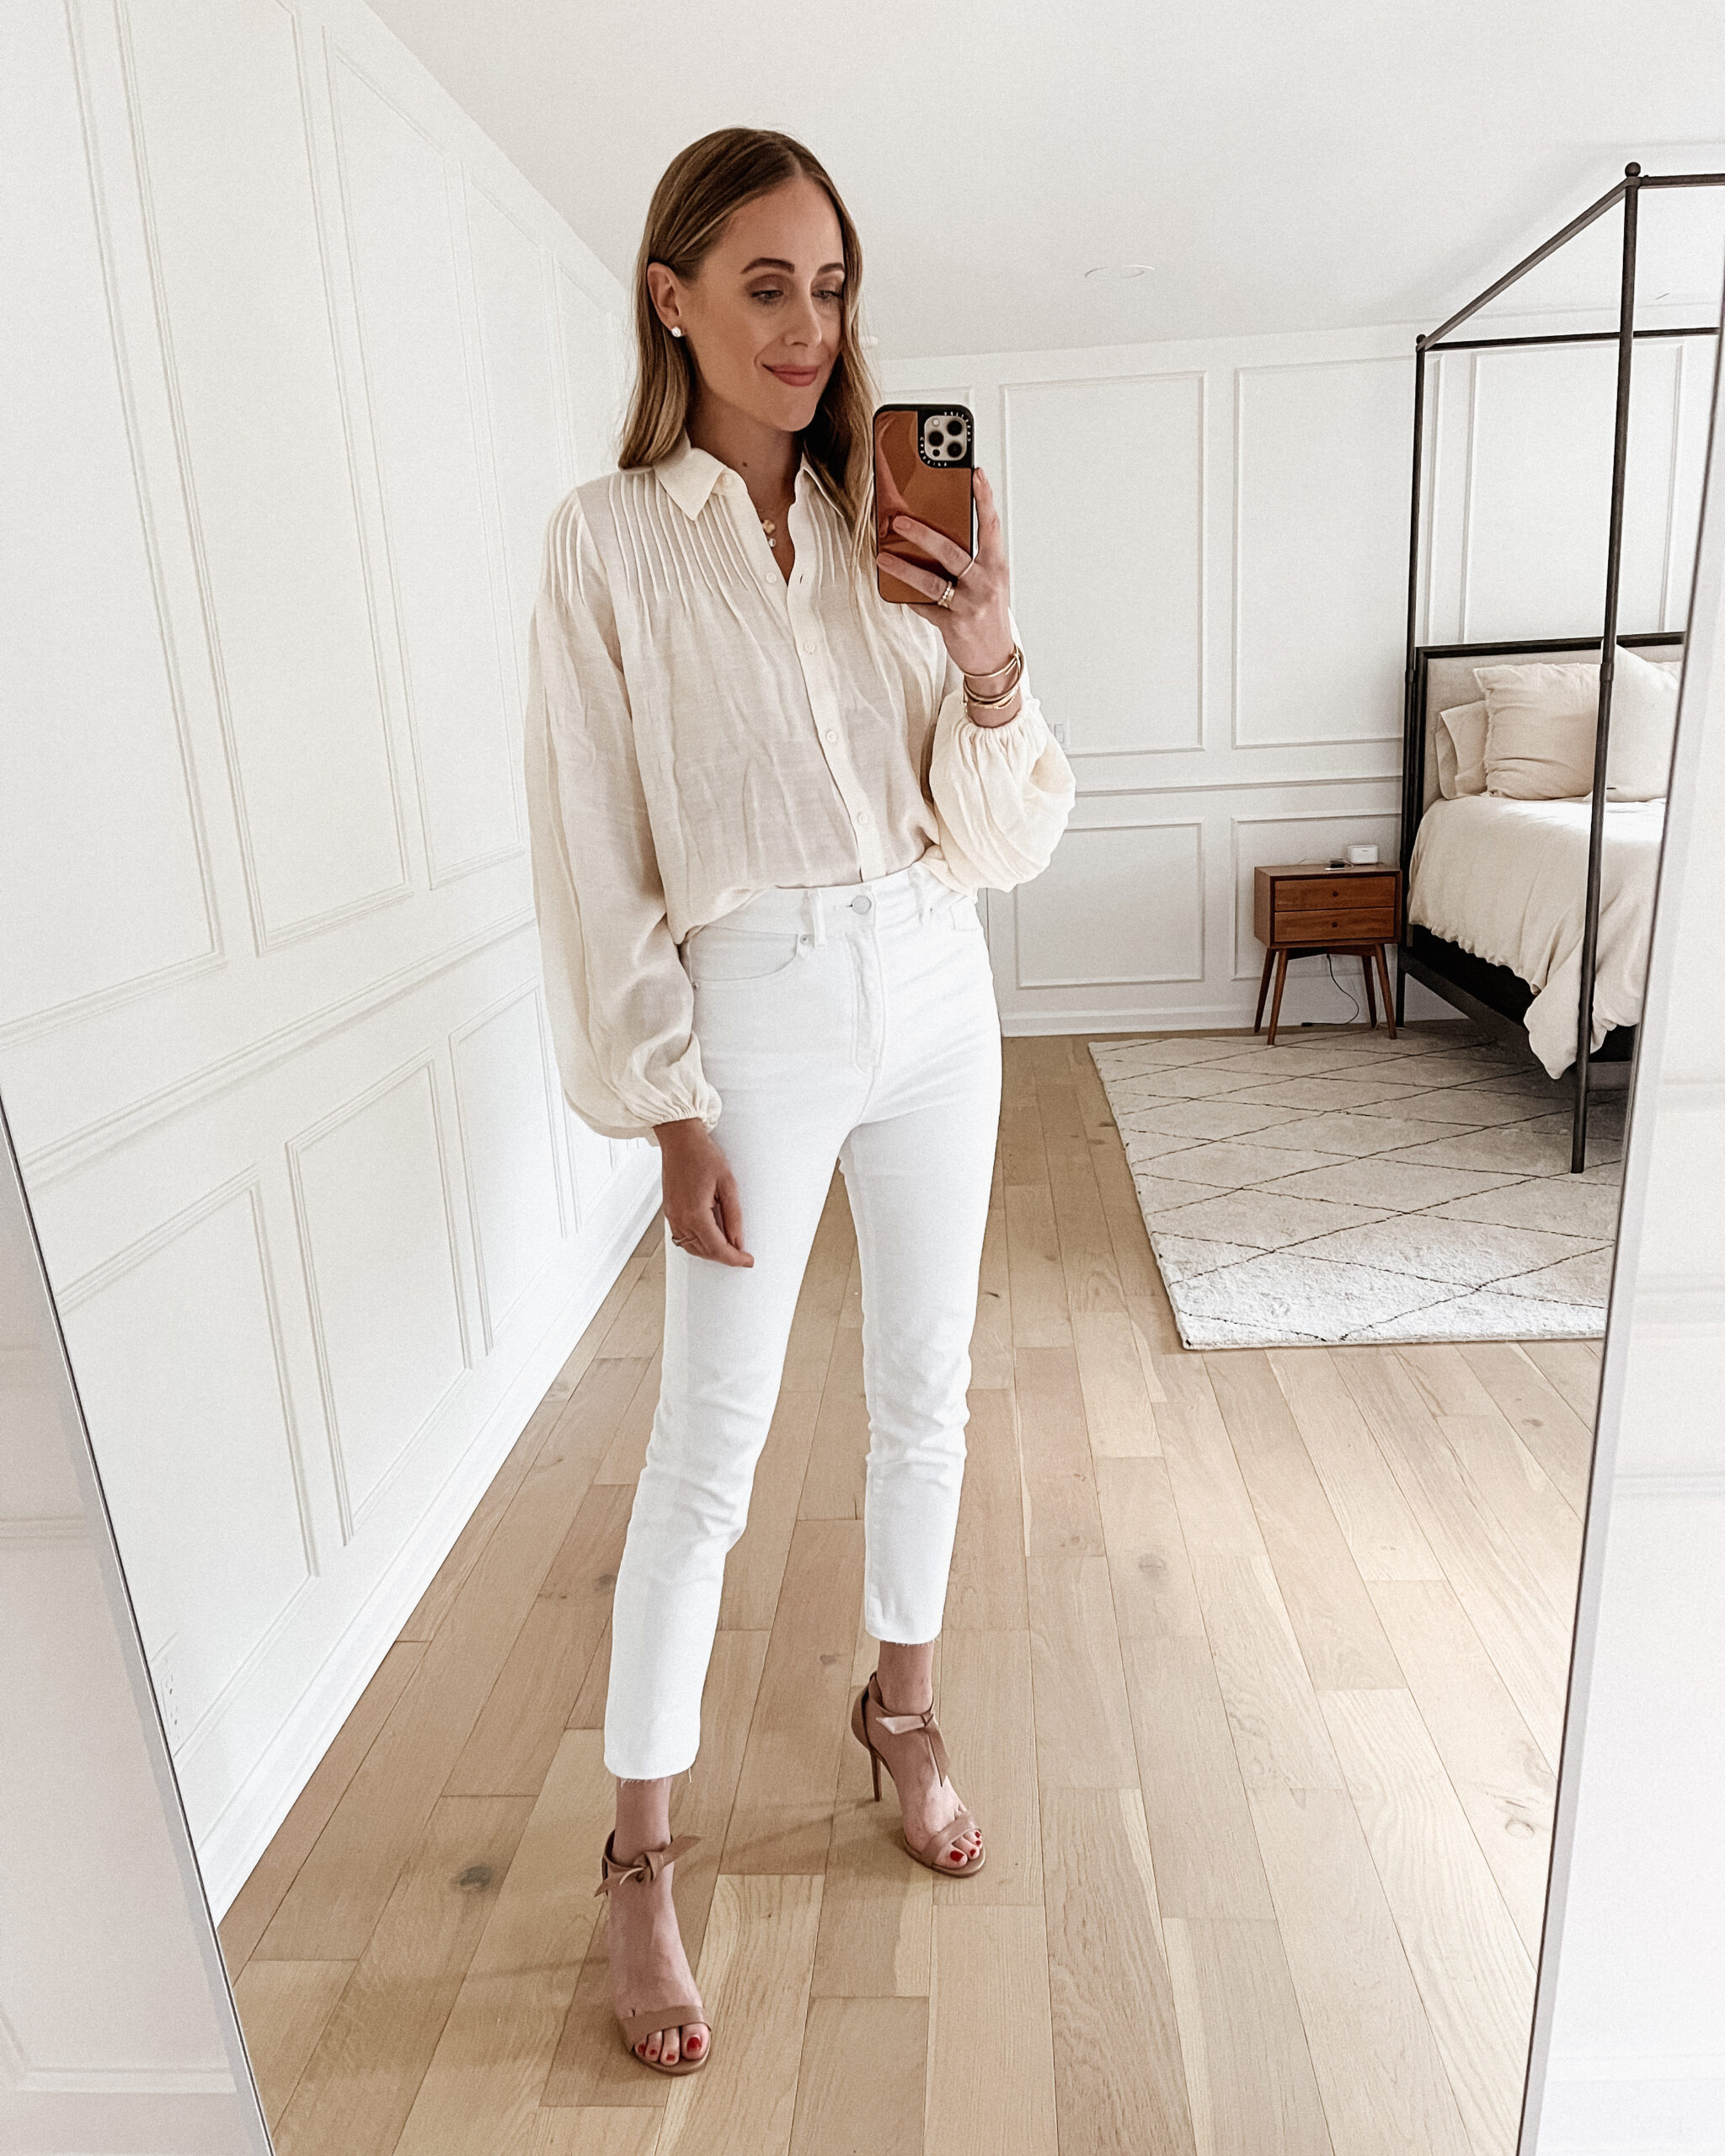 Fashion Jackson Wearing Express Ivory Long Sleeve Blouse White Jeans Tan Heeled Sandals Womens Workwear Outfit Ideas